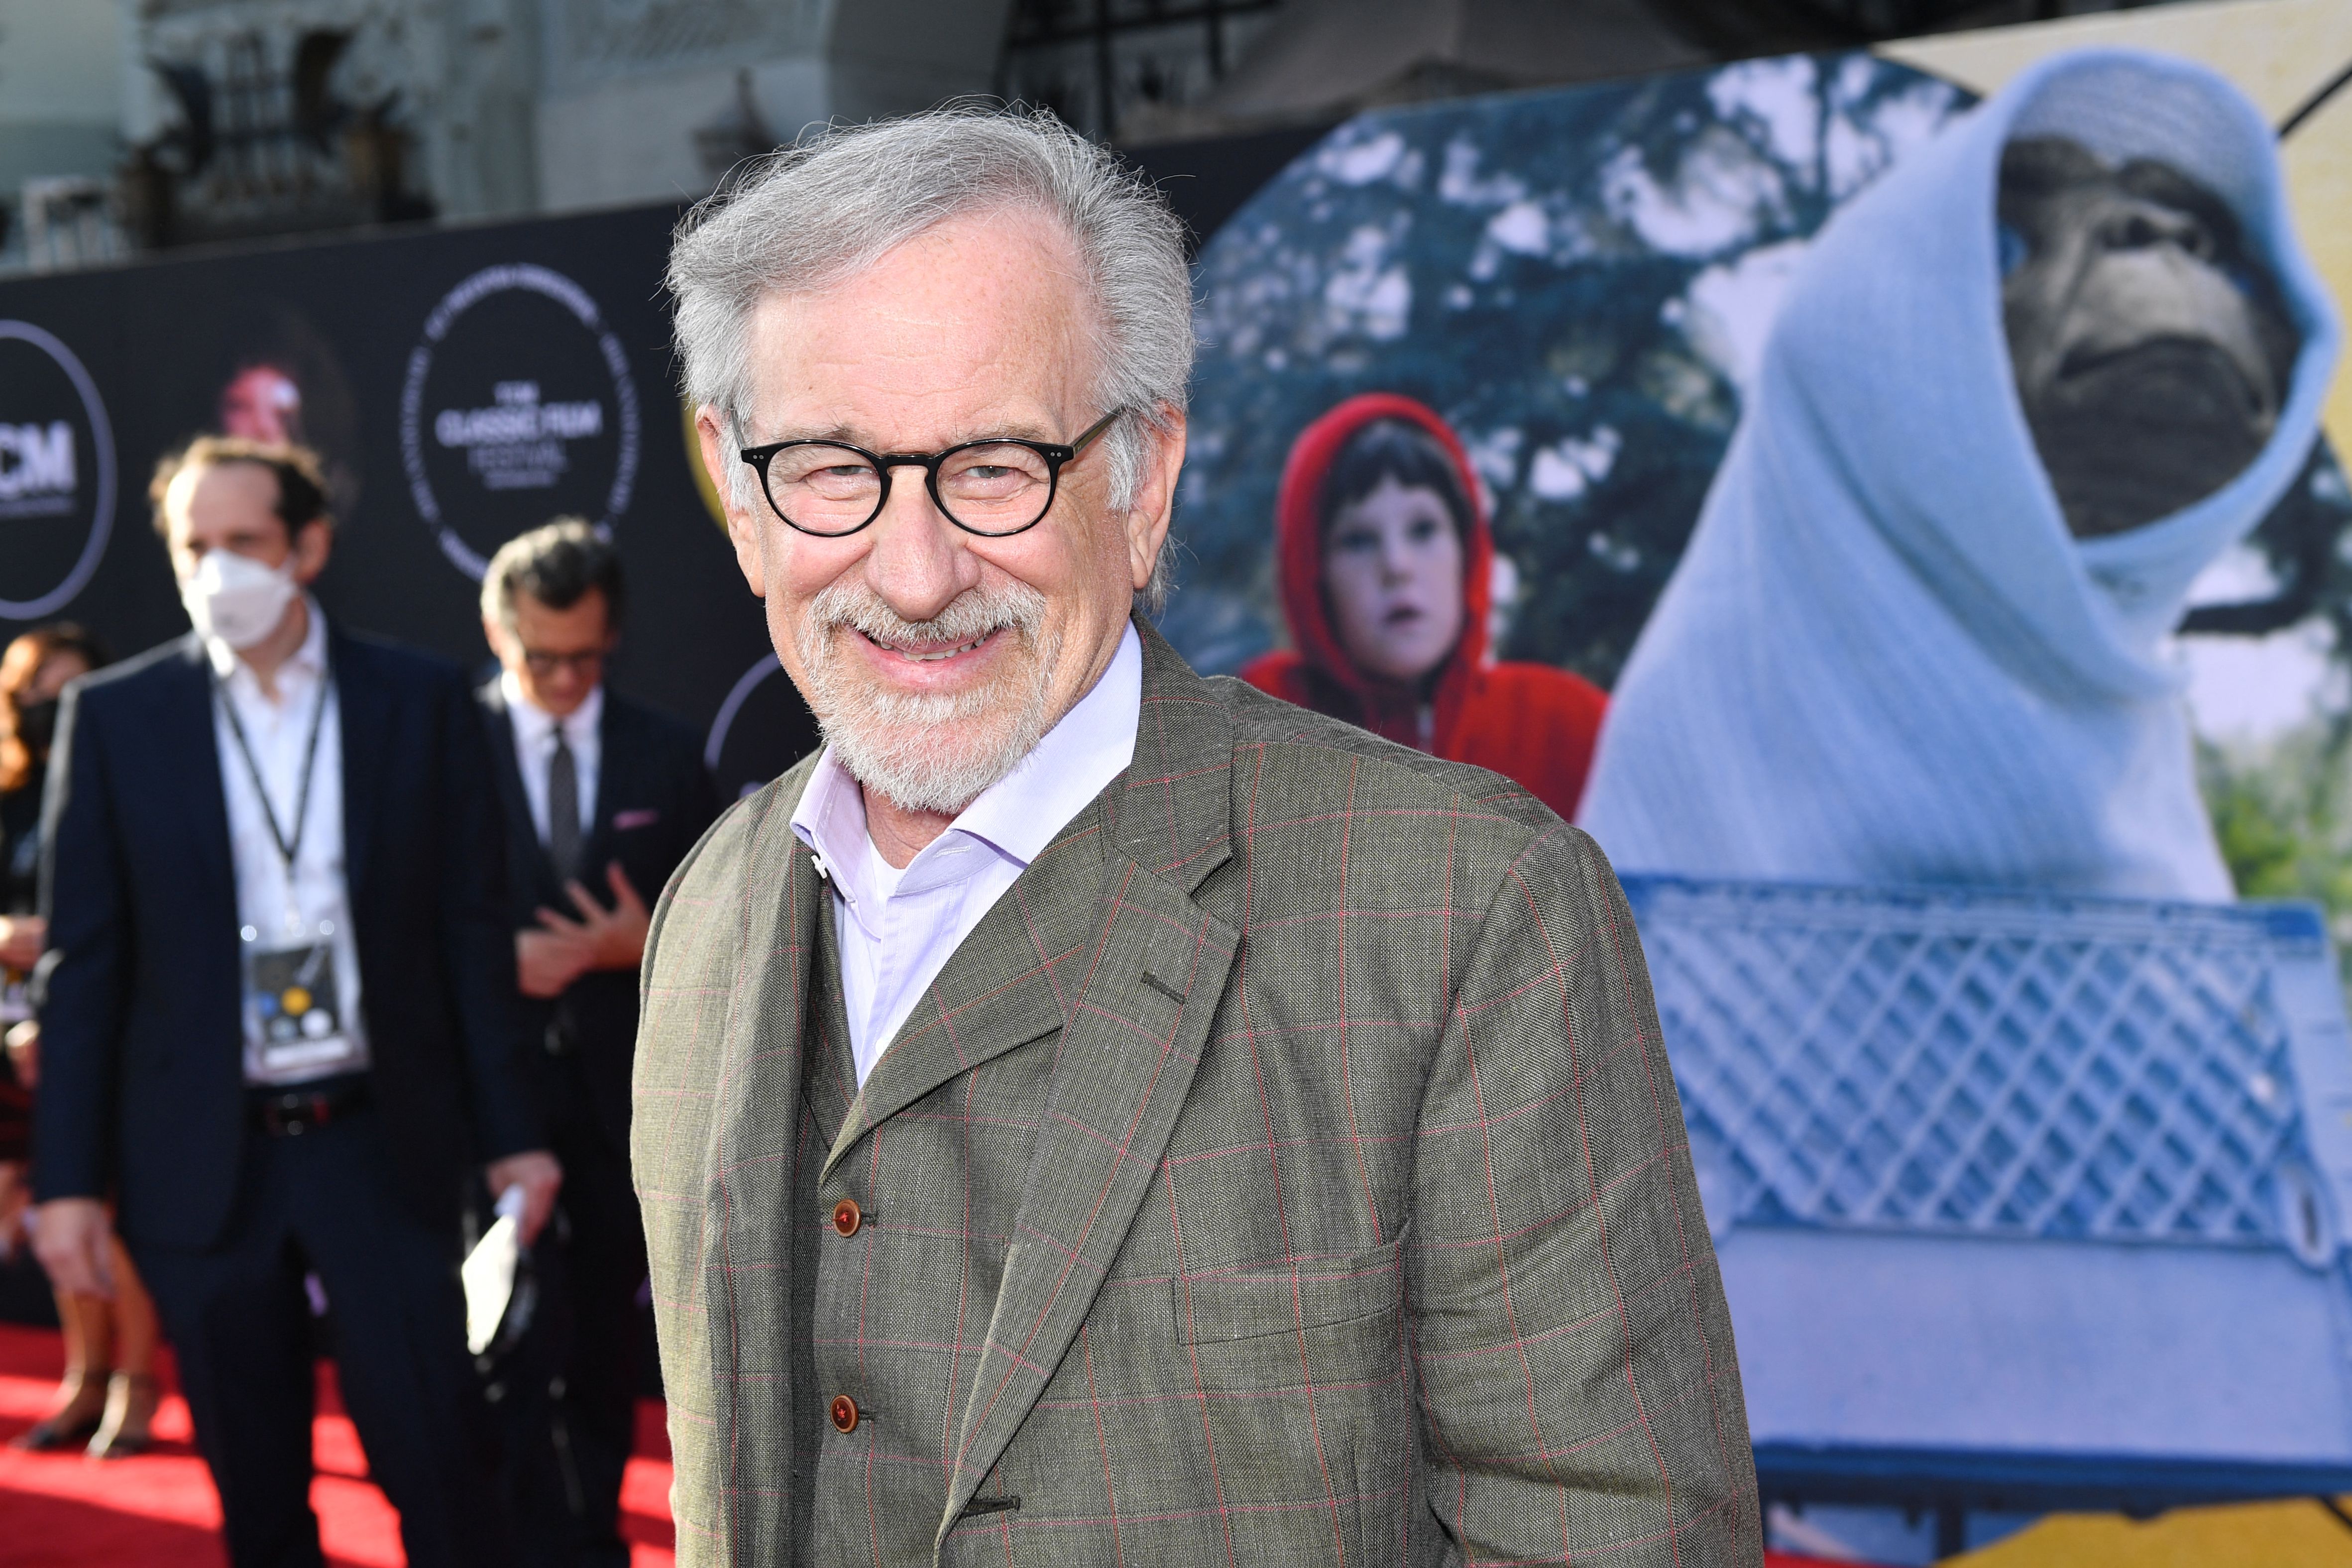 Steven Spielberg attends the 40th anniversary screening of E.T. at the TCM Classic Film Festival